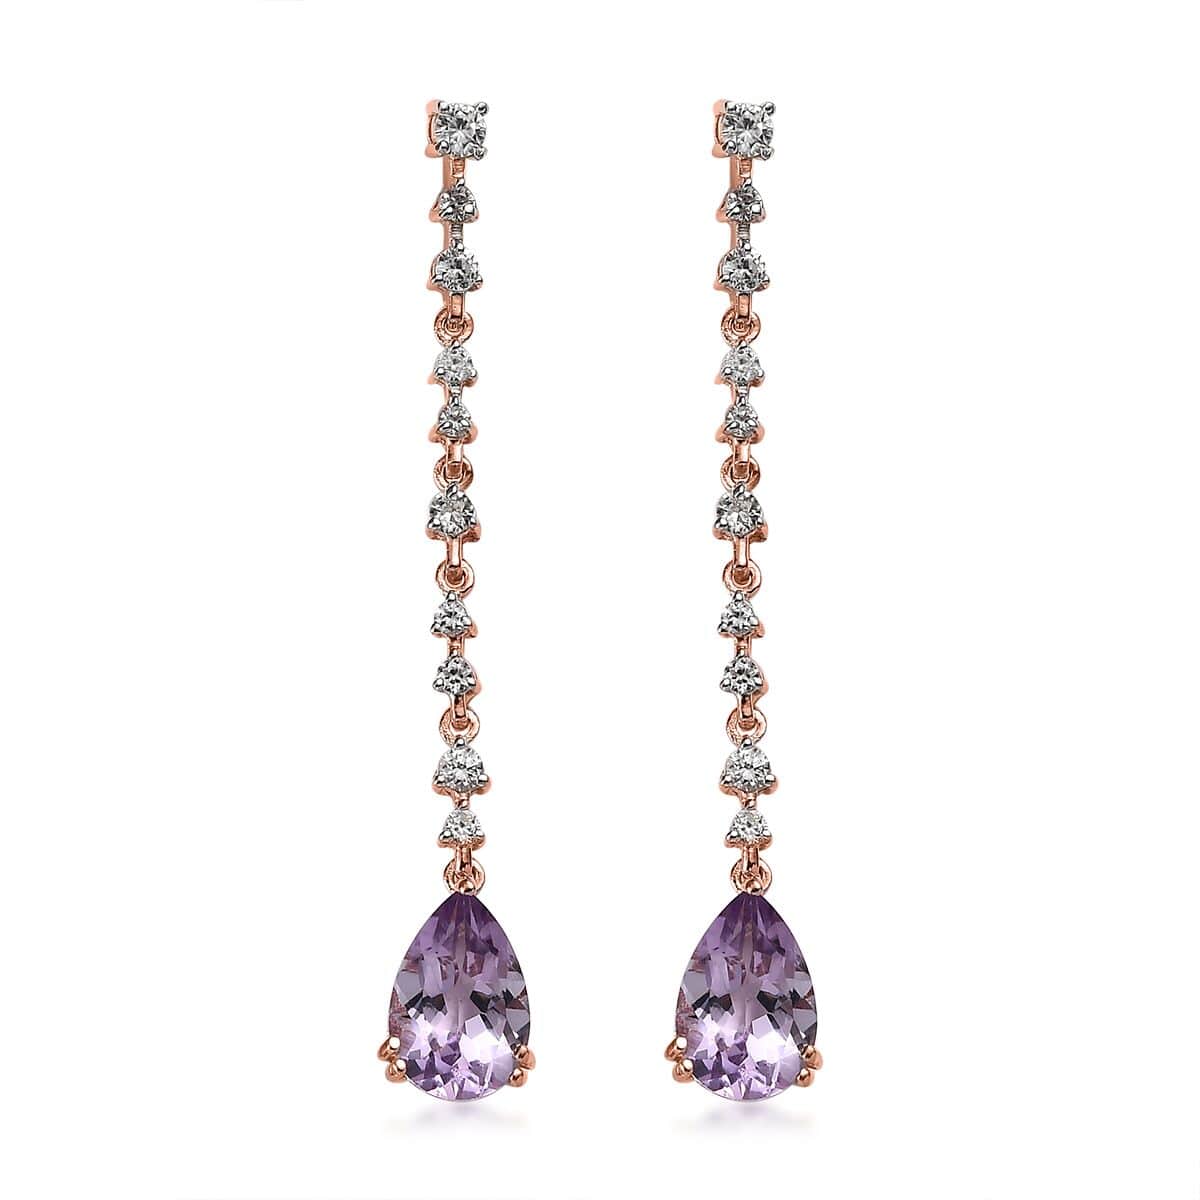 Buy AAA Rose De France Amethyst and White Zircon Drop Earrings in Vermeil  Rose Gold Over Sterling Silver 6.90 ctw at